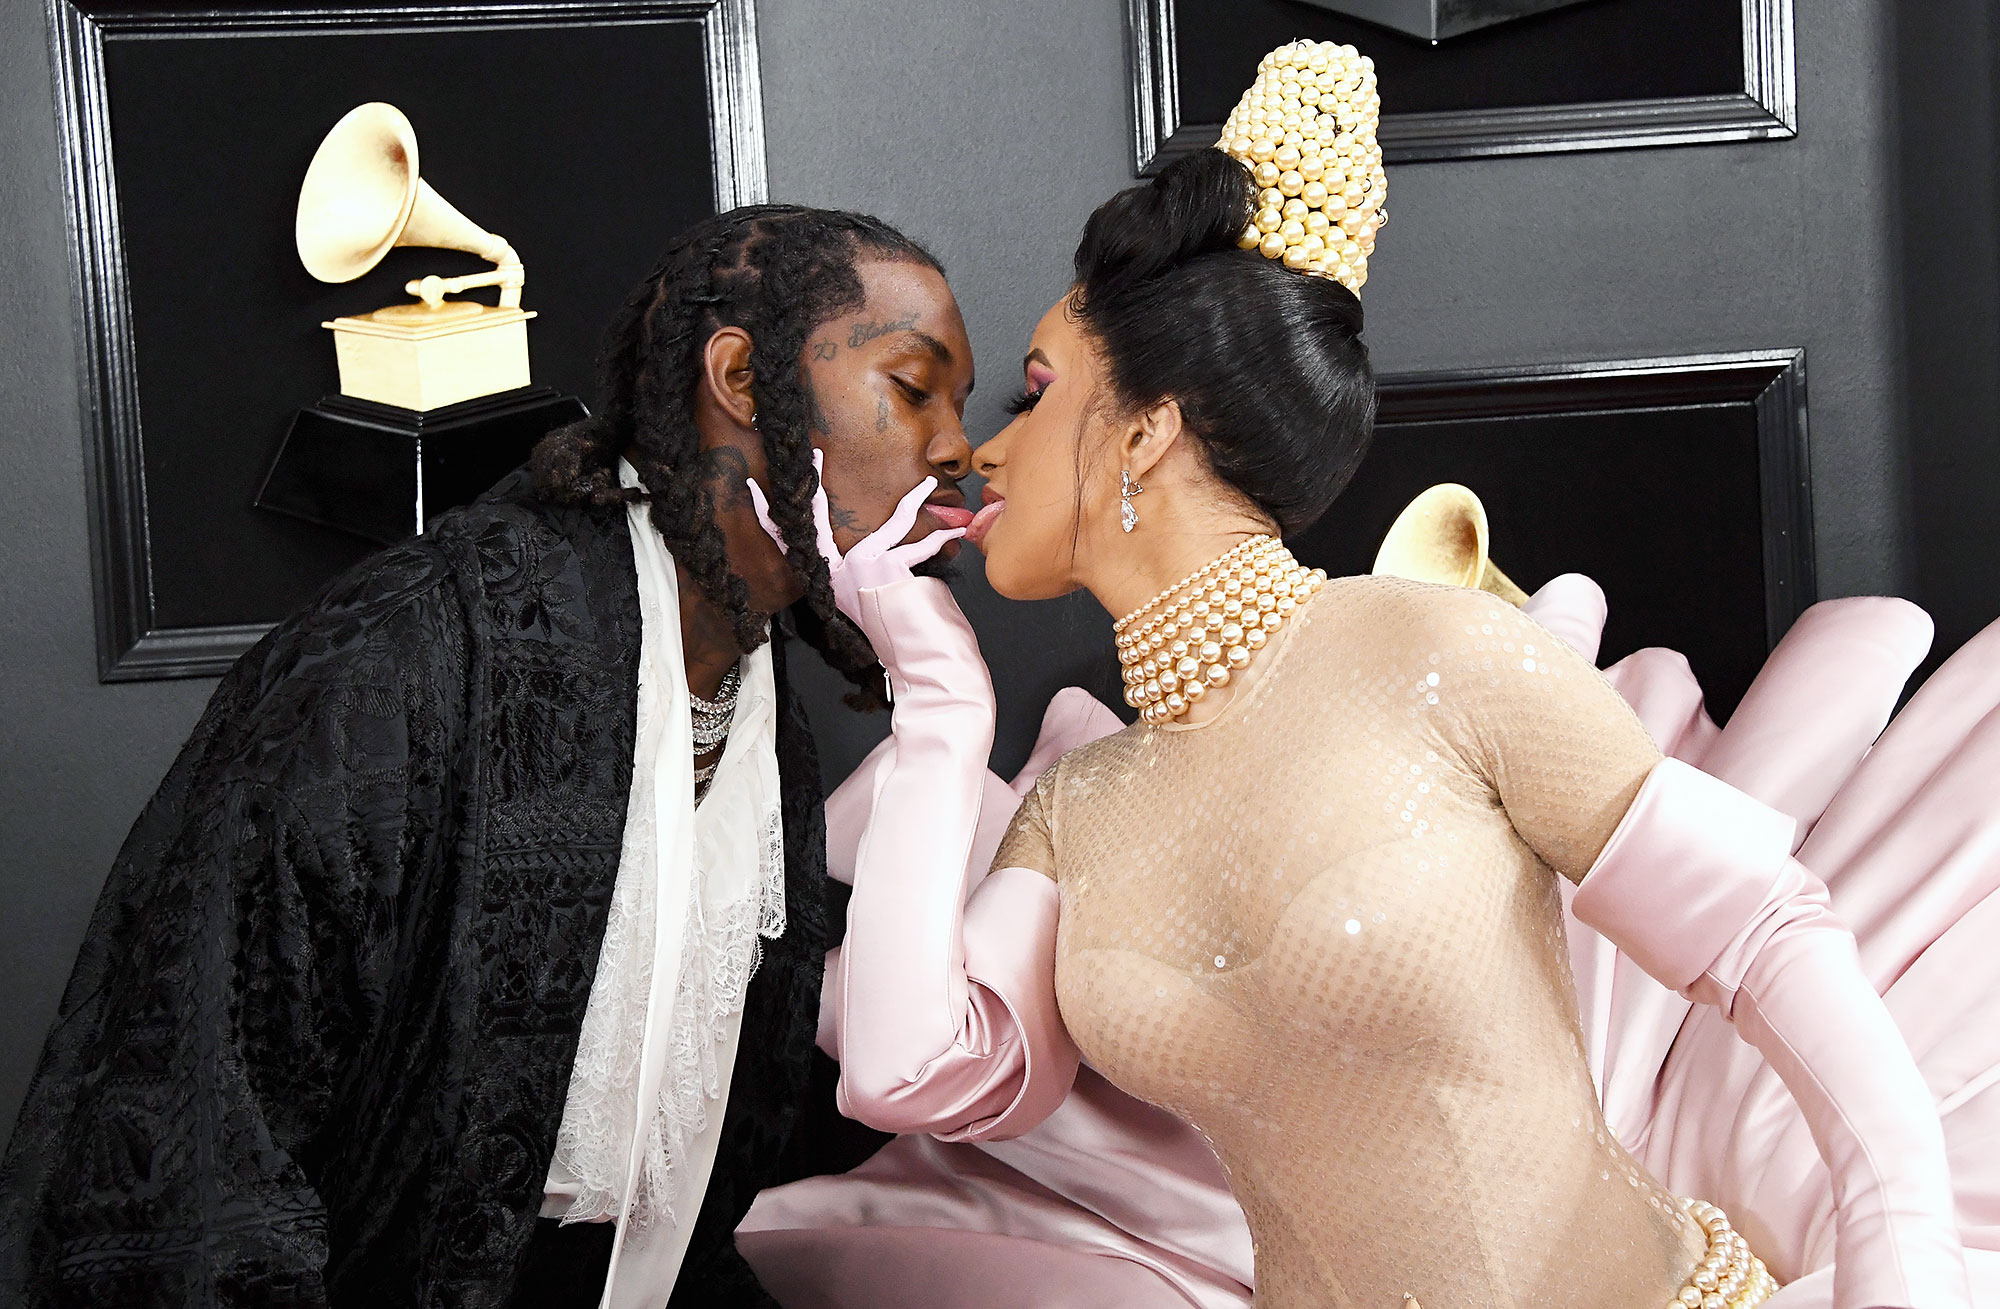 Grammys 2019 Cardi B, Offset Lick Each Other on the Red Carpet image